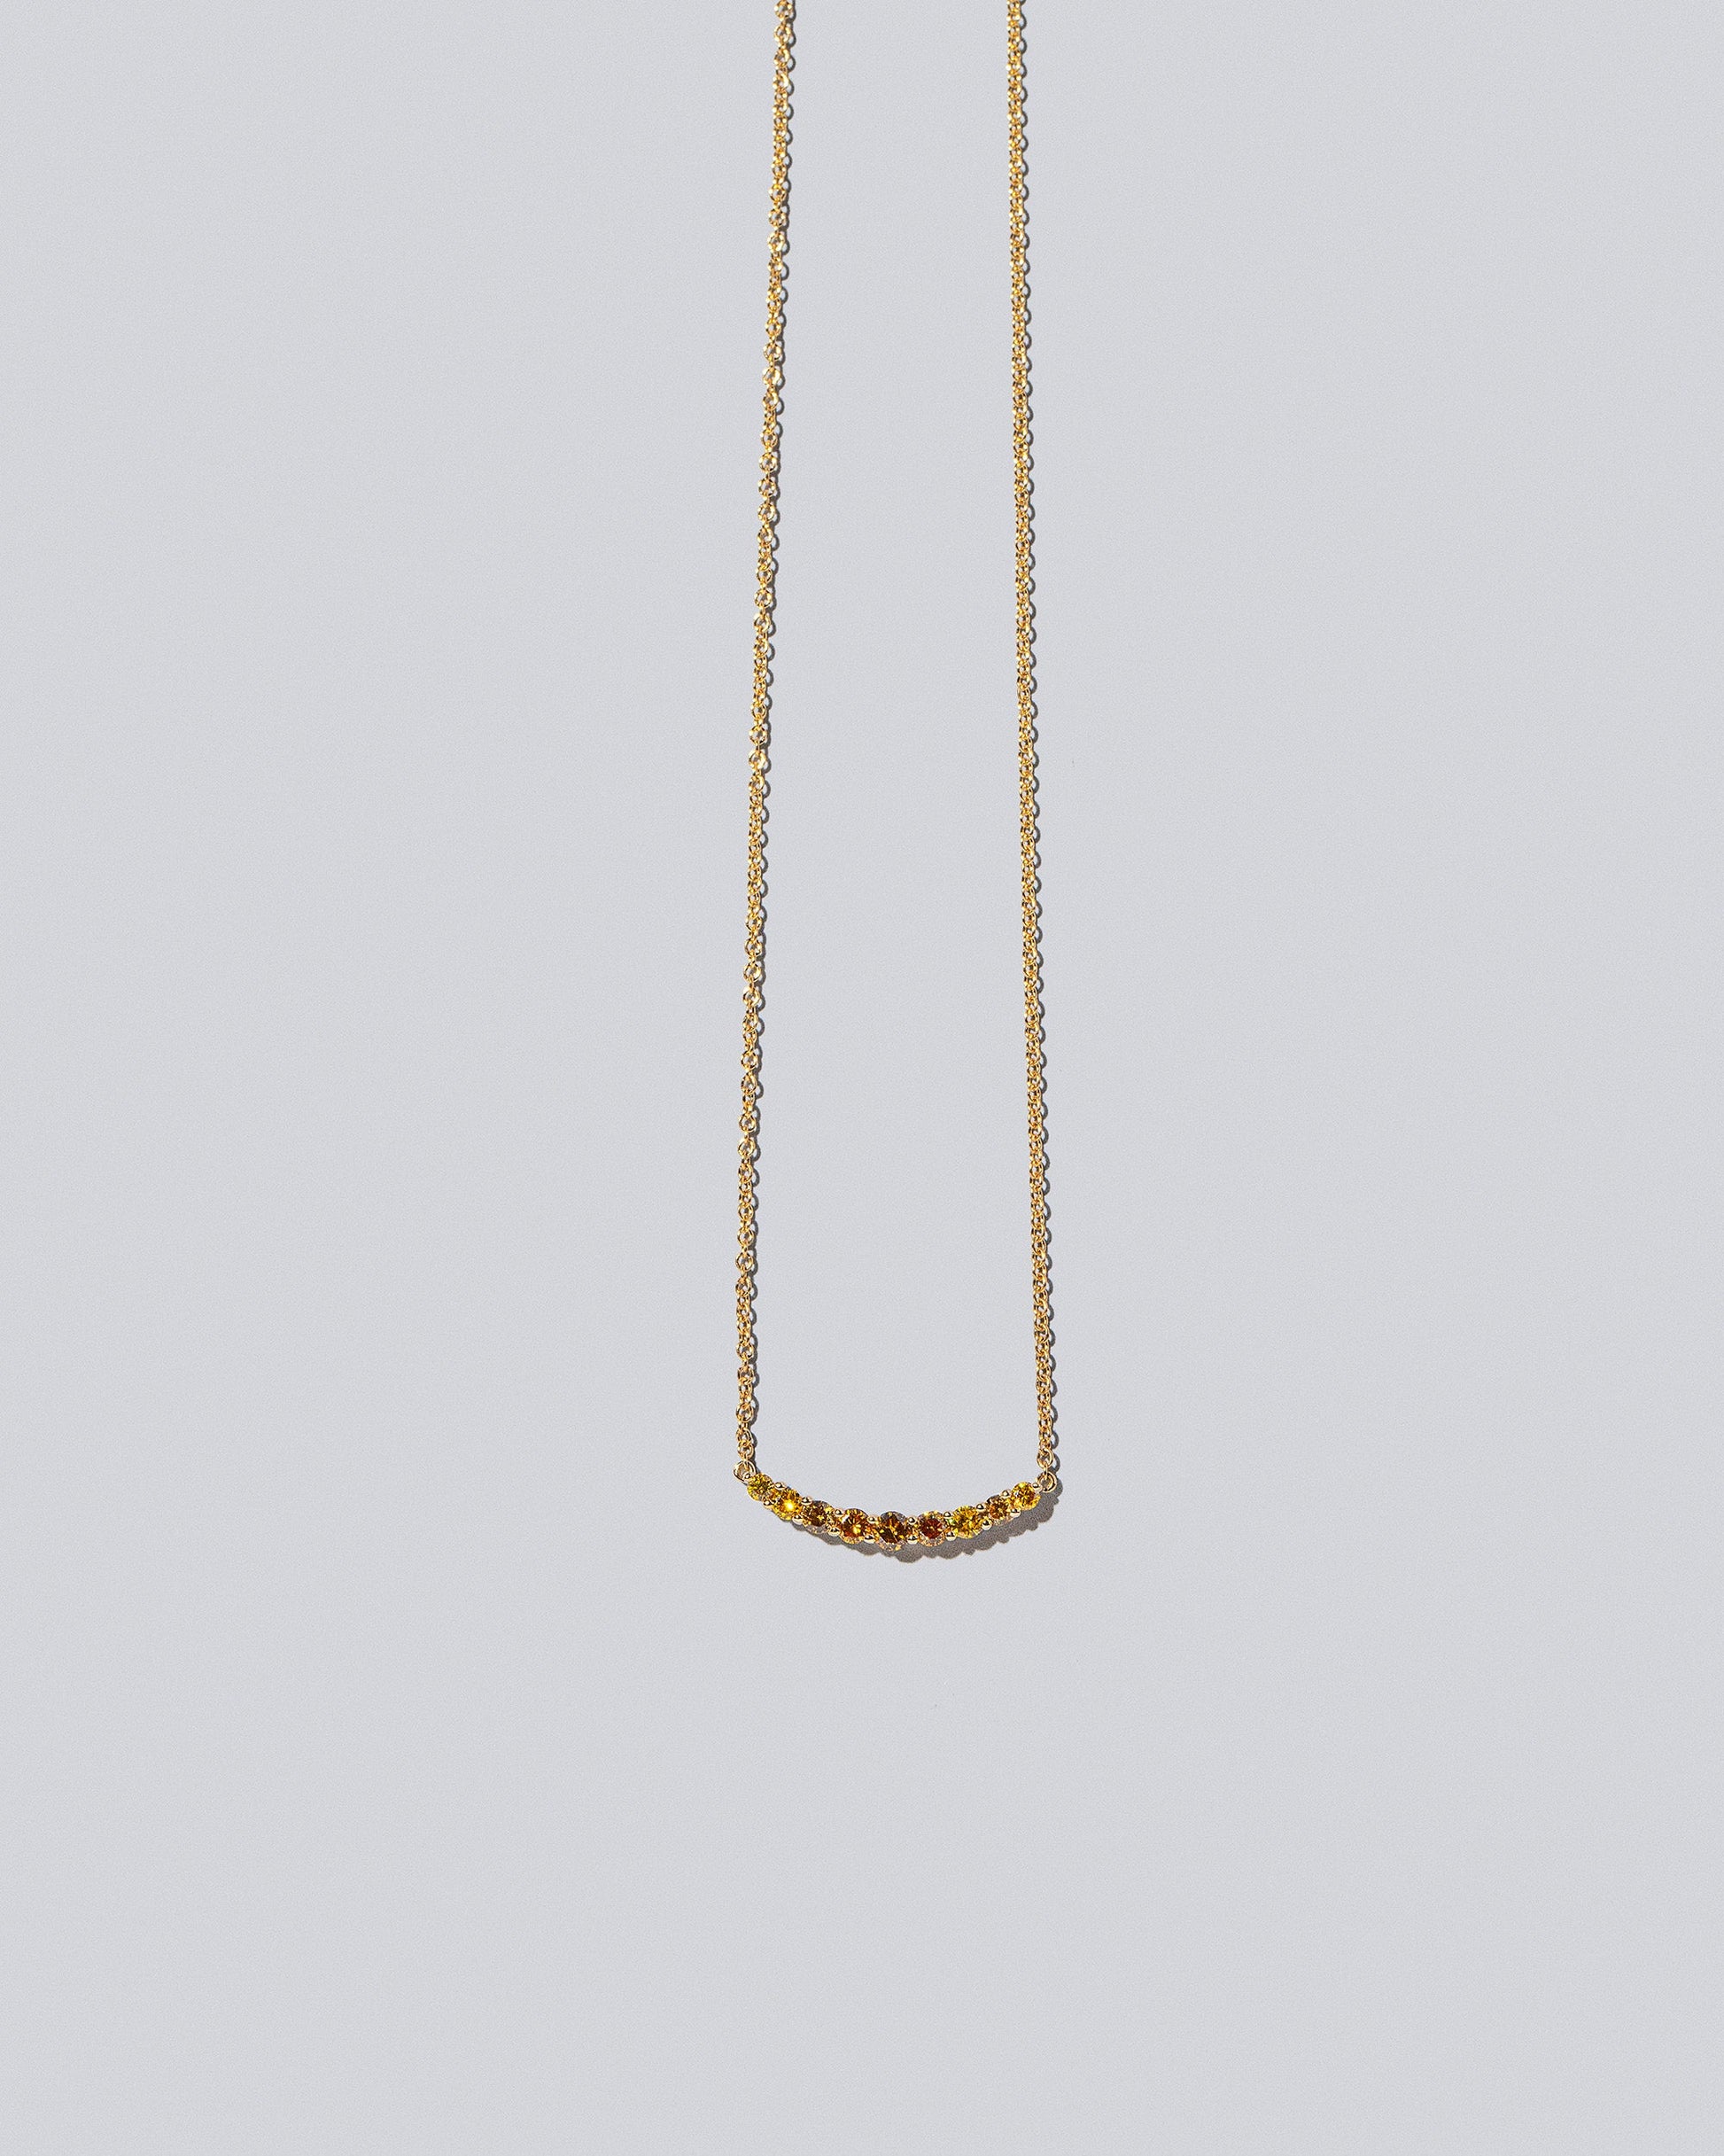 Crescent Necklace - Yellow Diamond on light colored background.